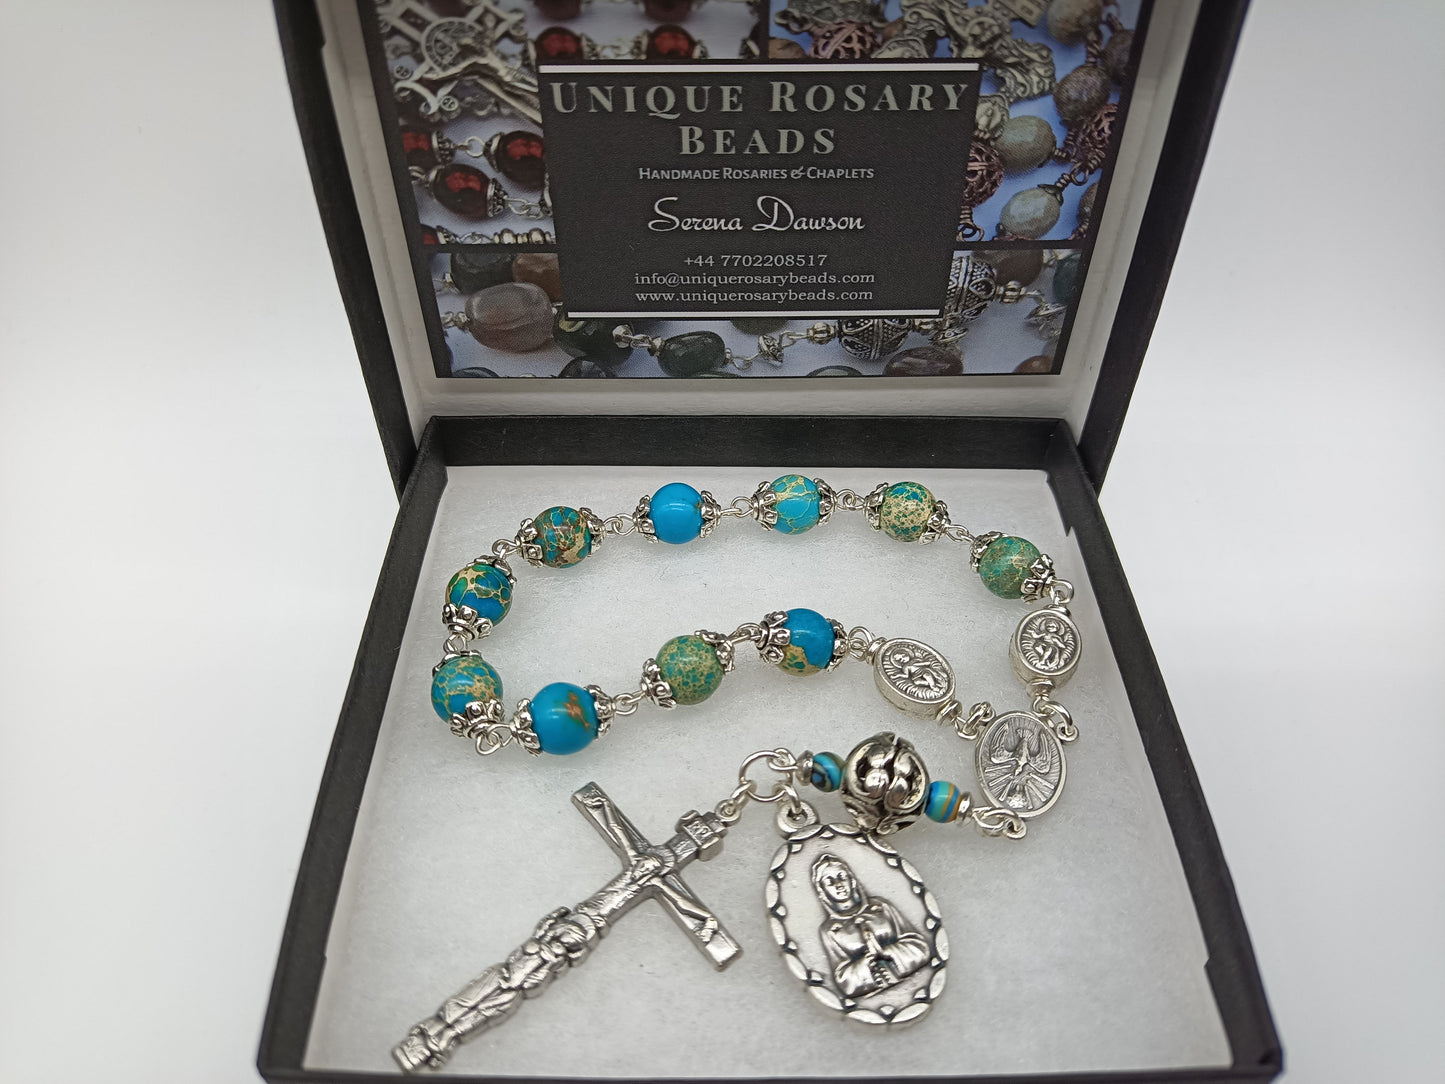 Maria Rosa Mistica handcrafted single decade prayer Beads, Holy Spirit Rosary beads, Our Lady of Sorrows Crucifix, pocket prayer beads.